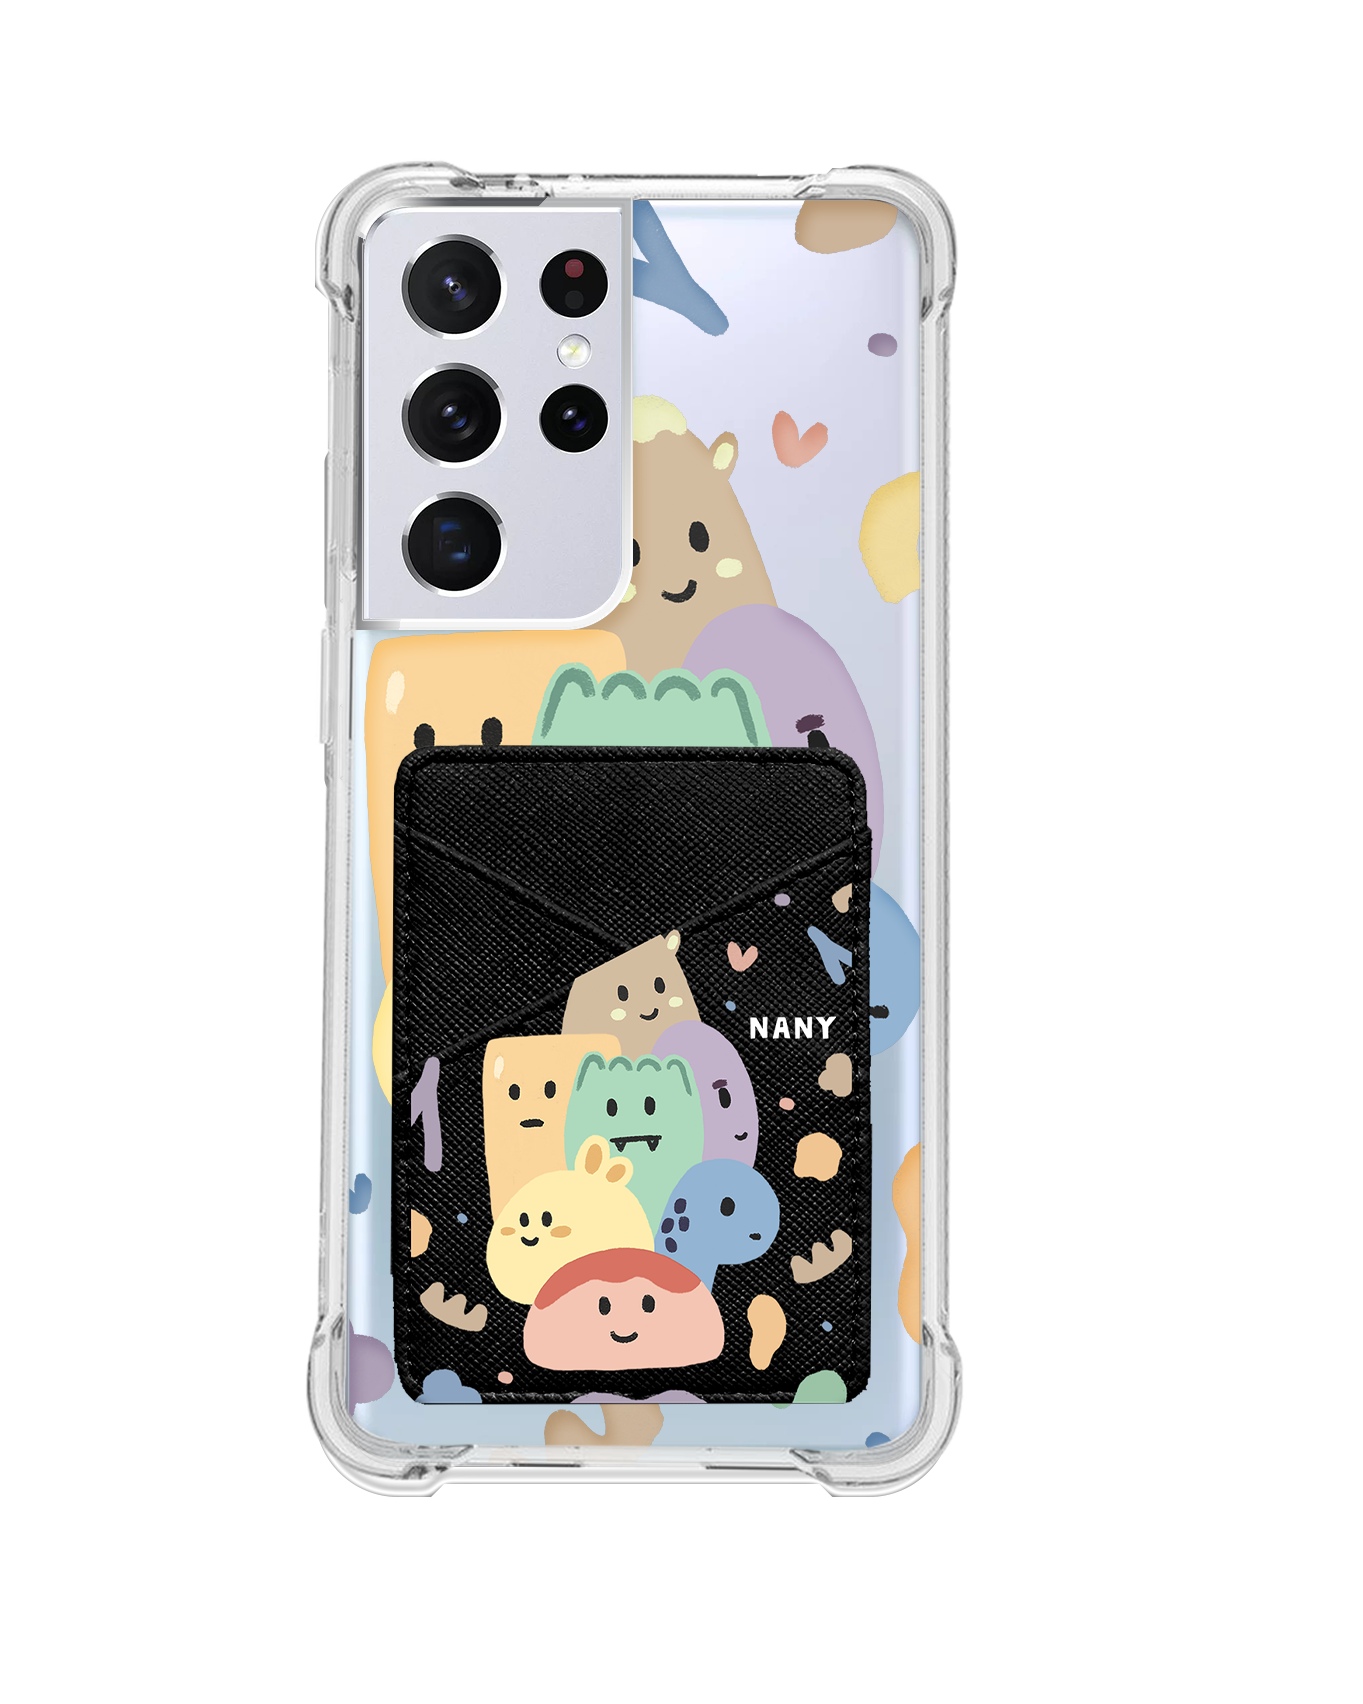 Android Phone Wallet Case - Doodle 2.0